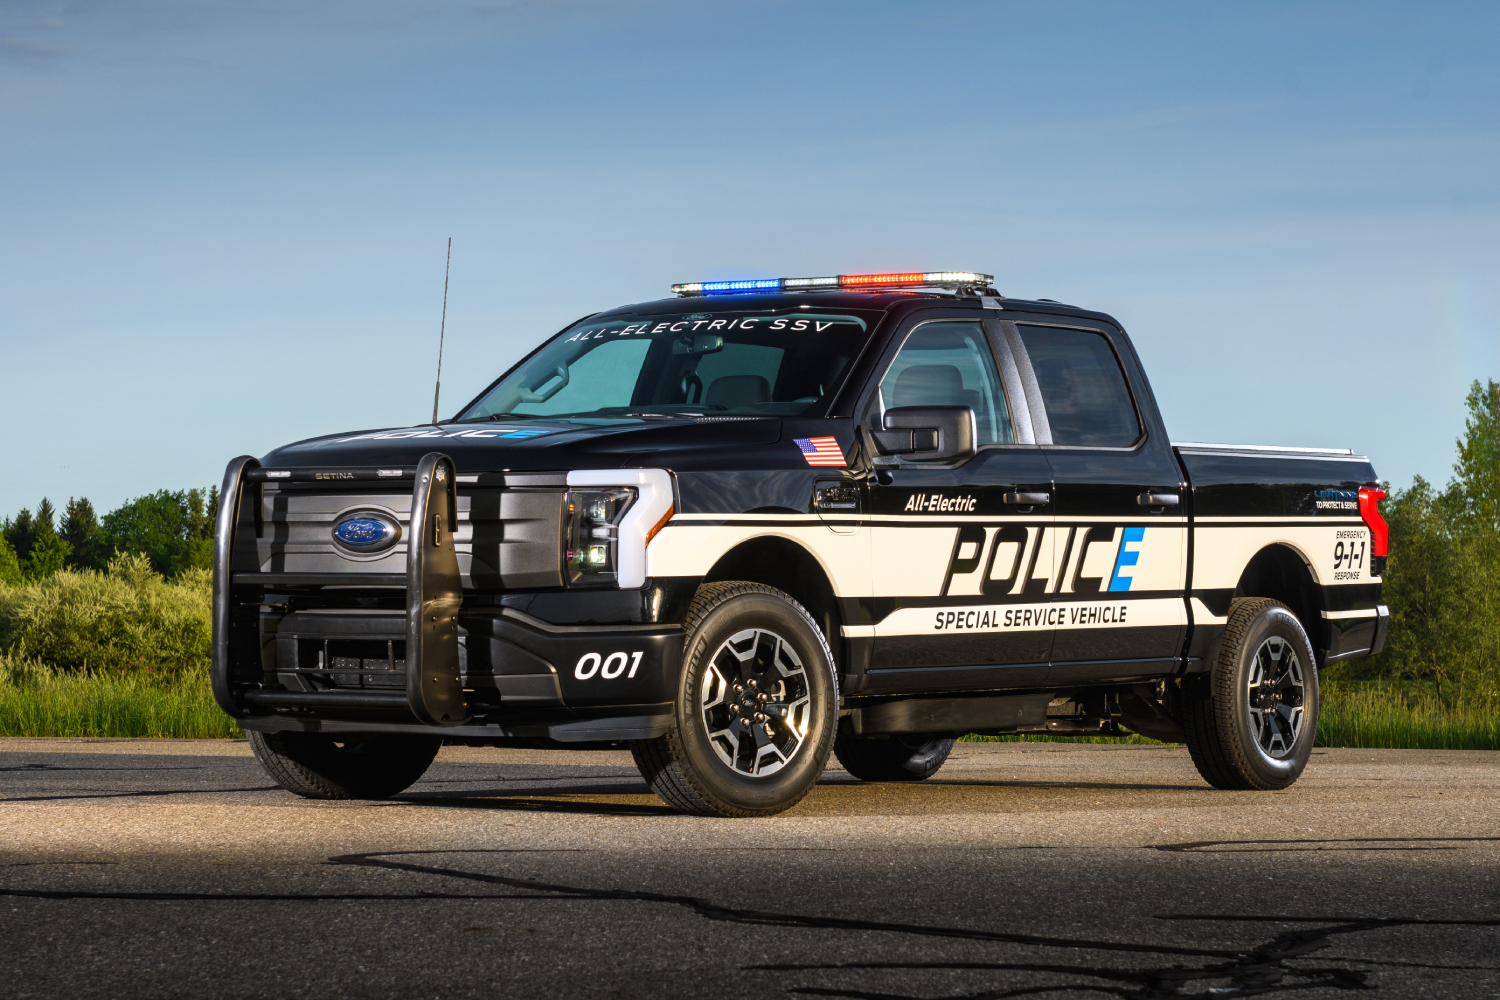 The 2023 Ford F-150 Lightning Pro Special Service Vehicle (SSV) as shown here